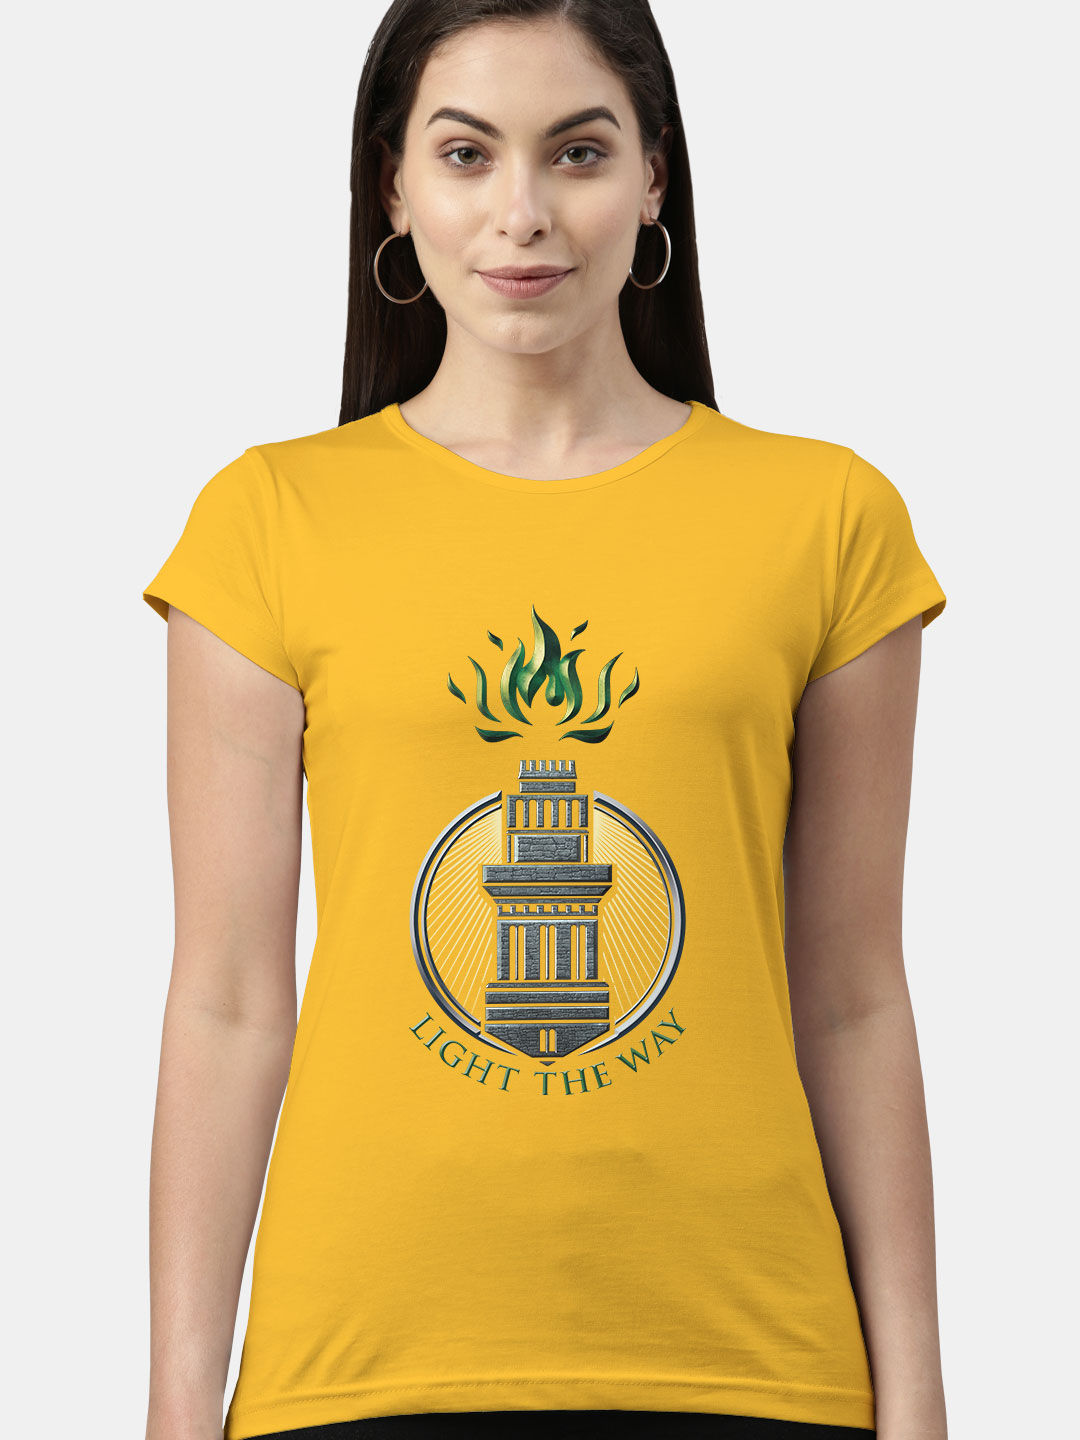 Buy Light the Way Front Yellow - Female Designer T-Shirts T-Shirts Online